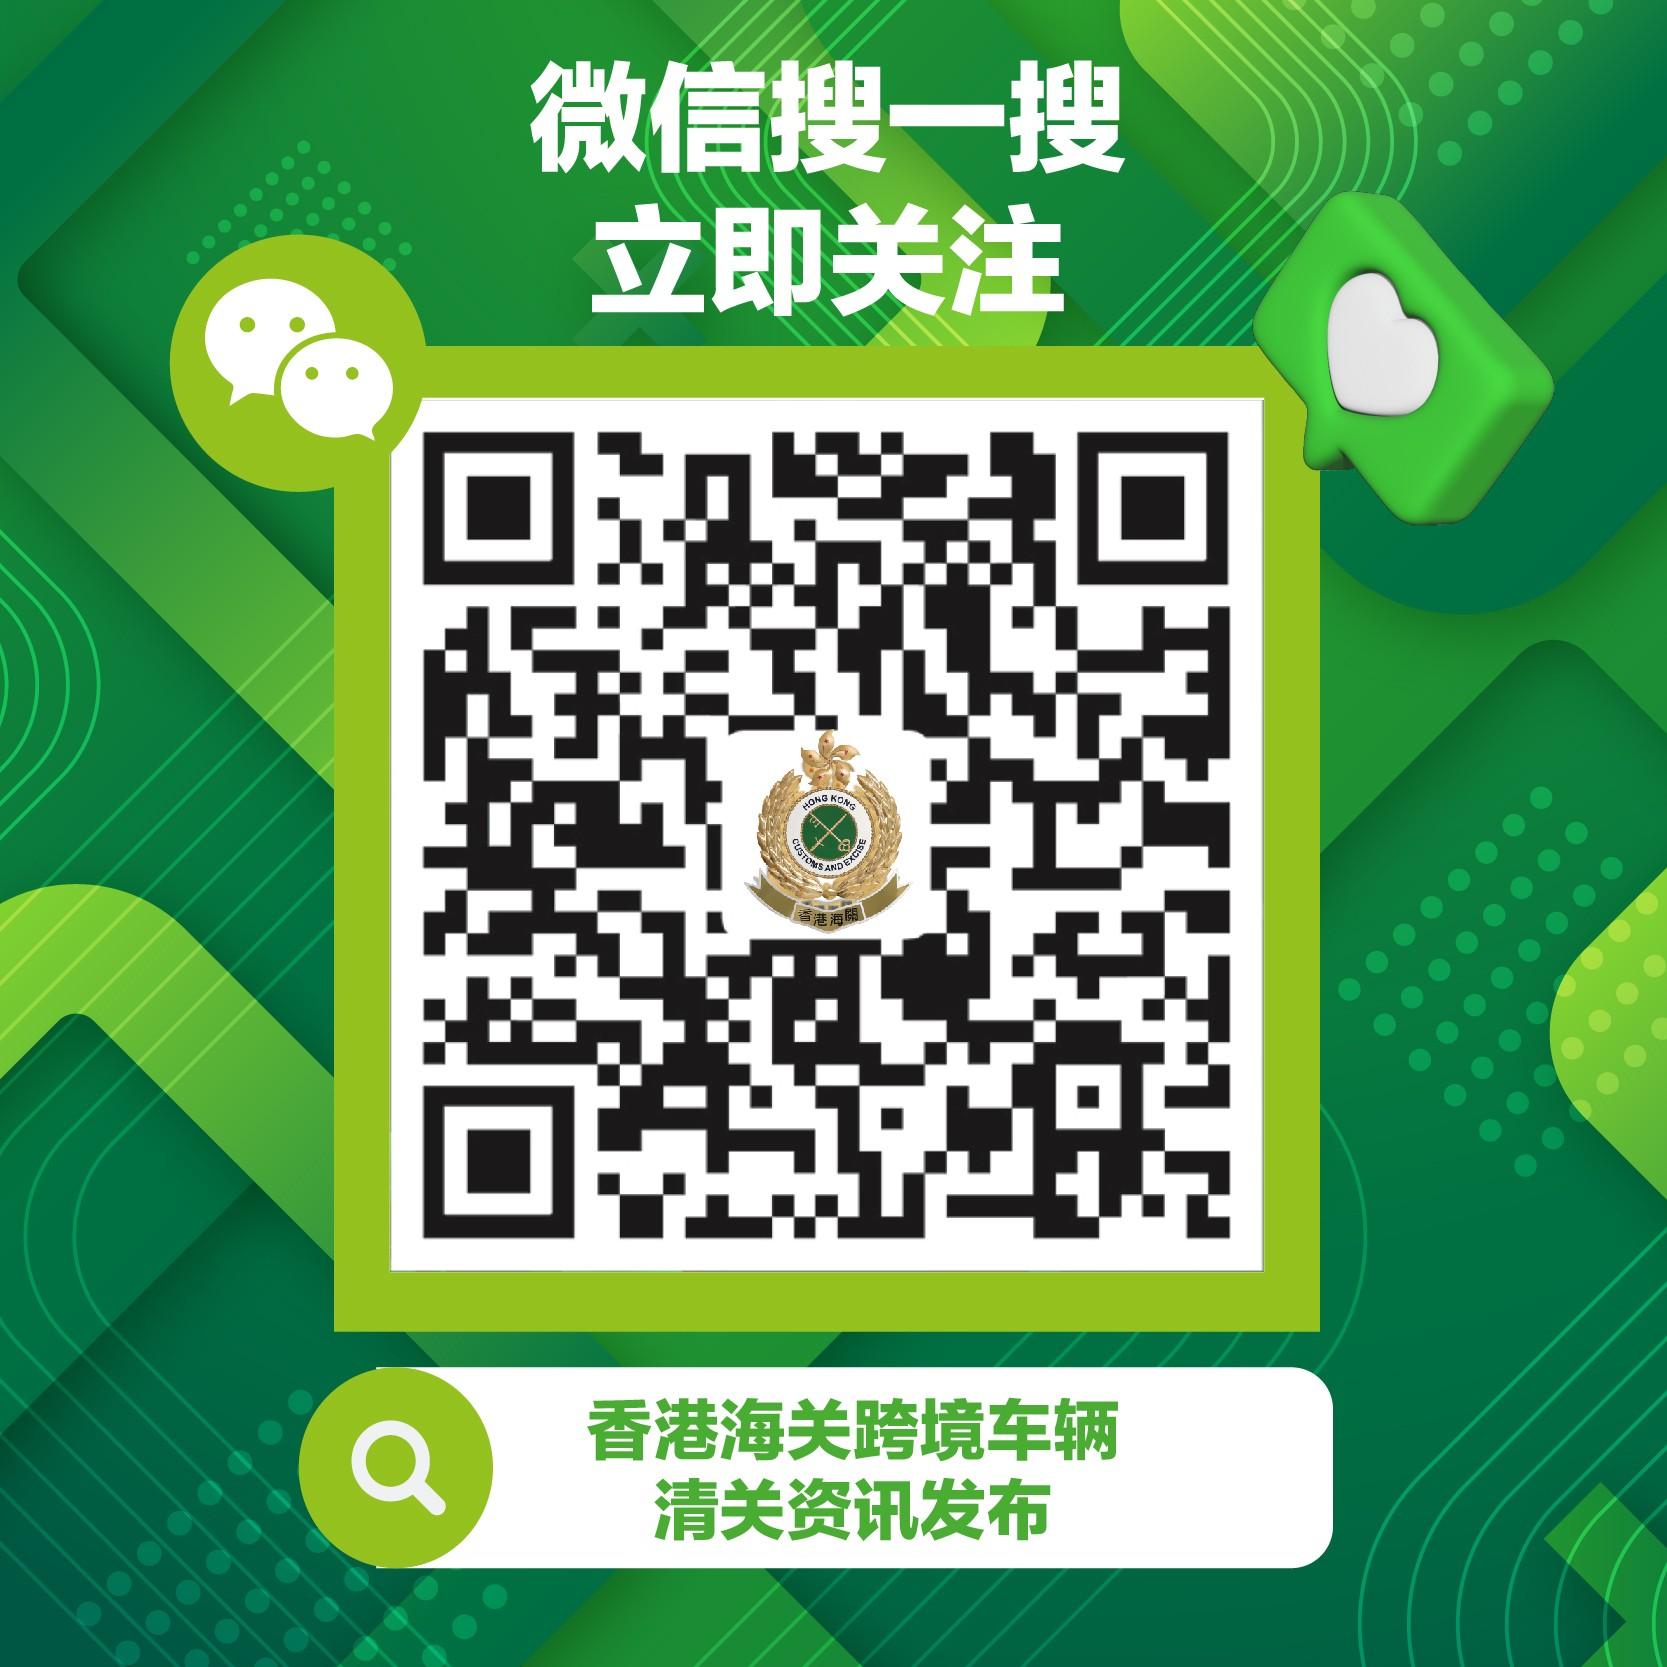 To follow the Customs and Excise Department WeChat Official Account for cross-boundary drivers and obtain the latest information, members of the public and travellers can use the WeChat mobile application to scan the QR code of the Official Account.